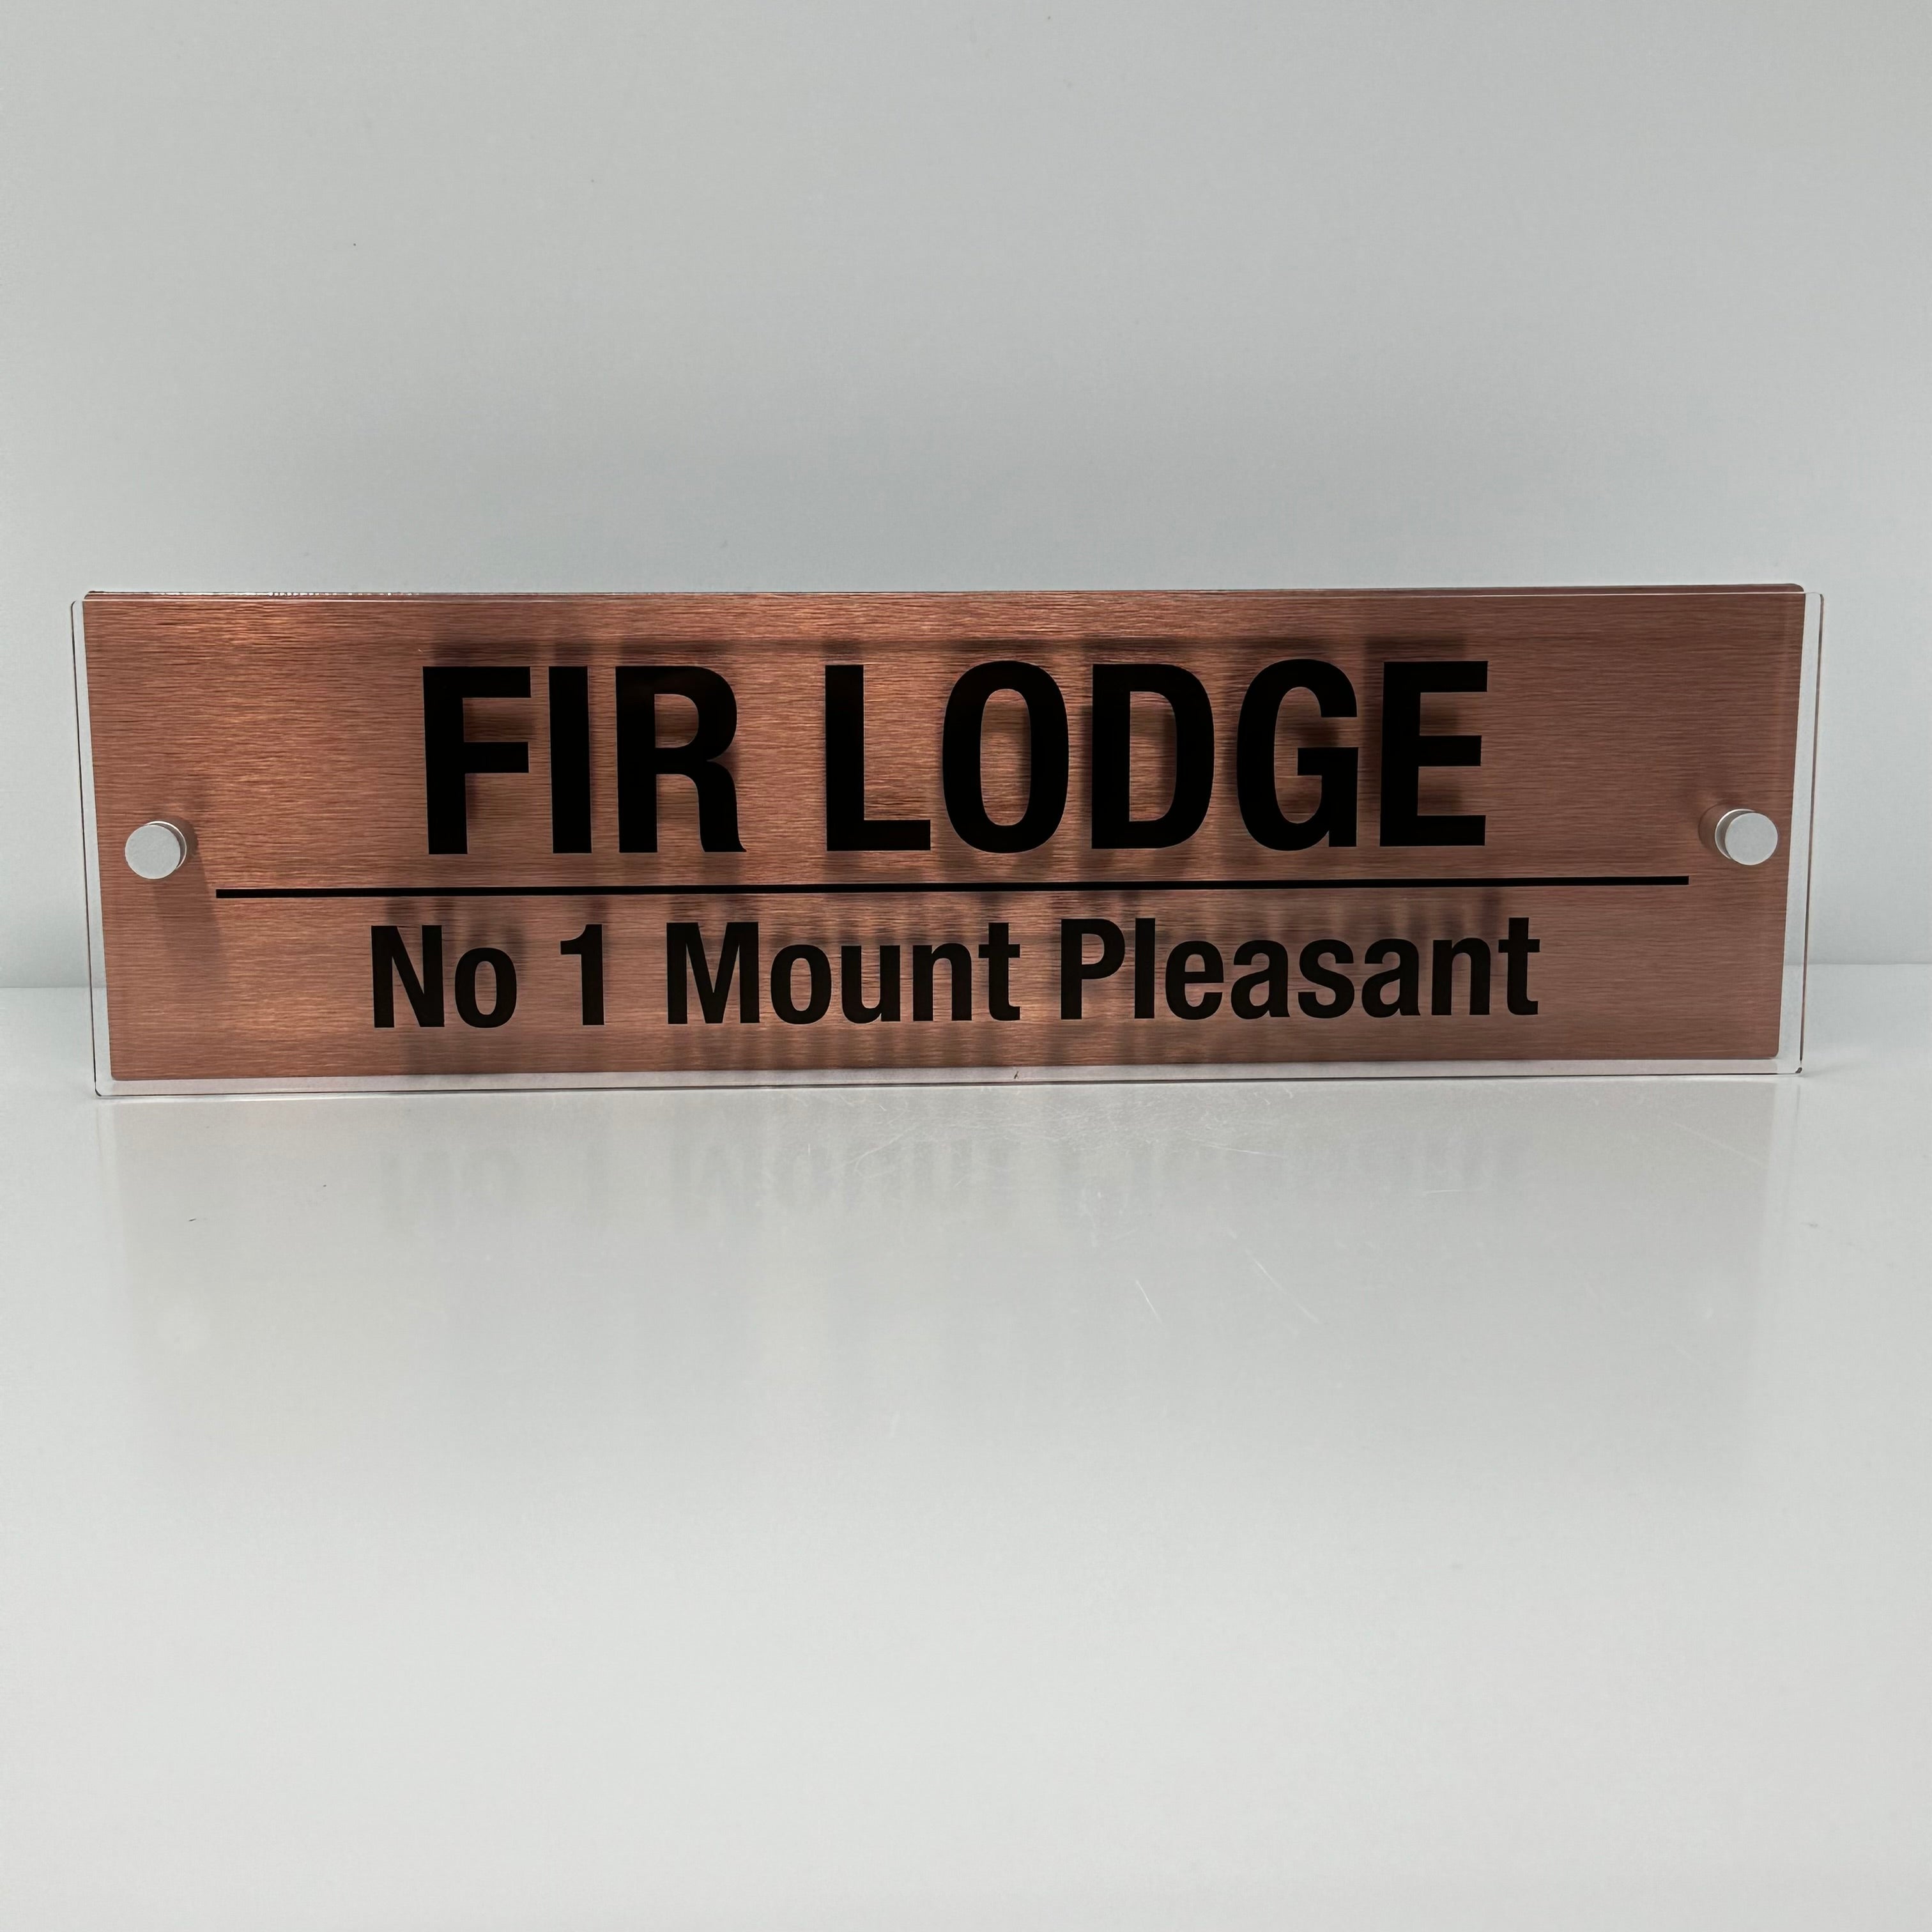 The Fir Lodge Modern House Sign with Perspex Acrylic Front, Copper Rear Panel and Satin Silver Stand Off Fixings ( Size - 42cm x 12cm )